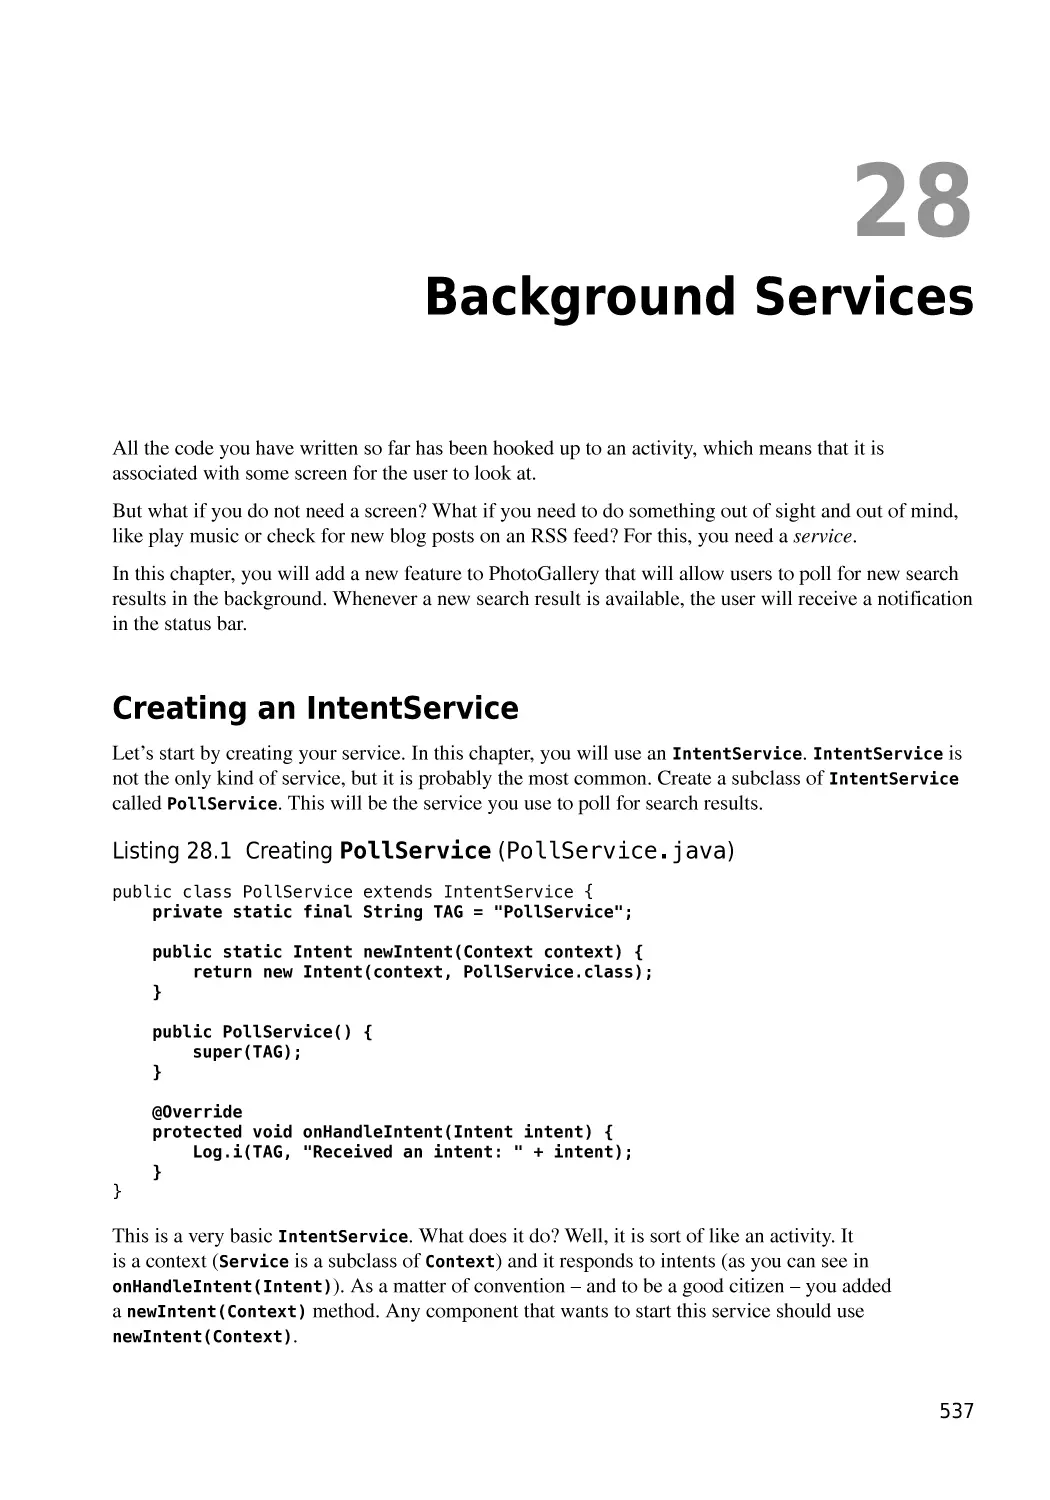 Chapter 28  Background Services
Creating an IntentService